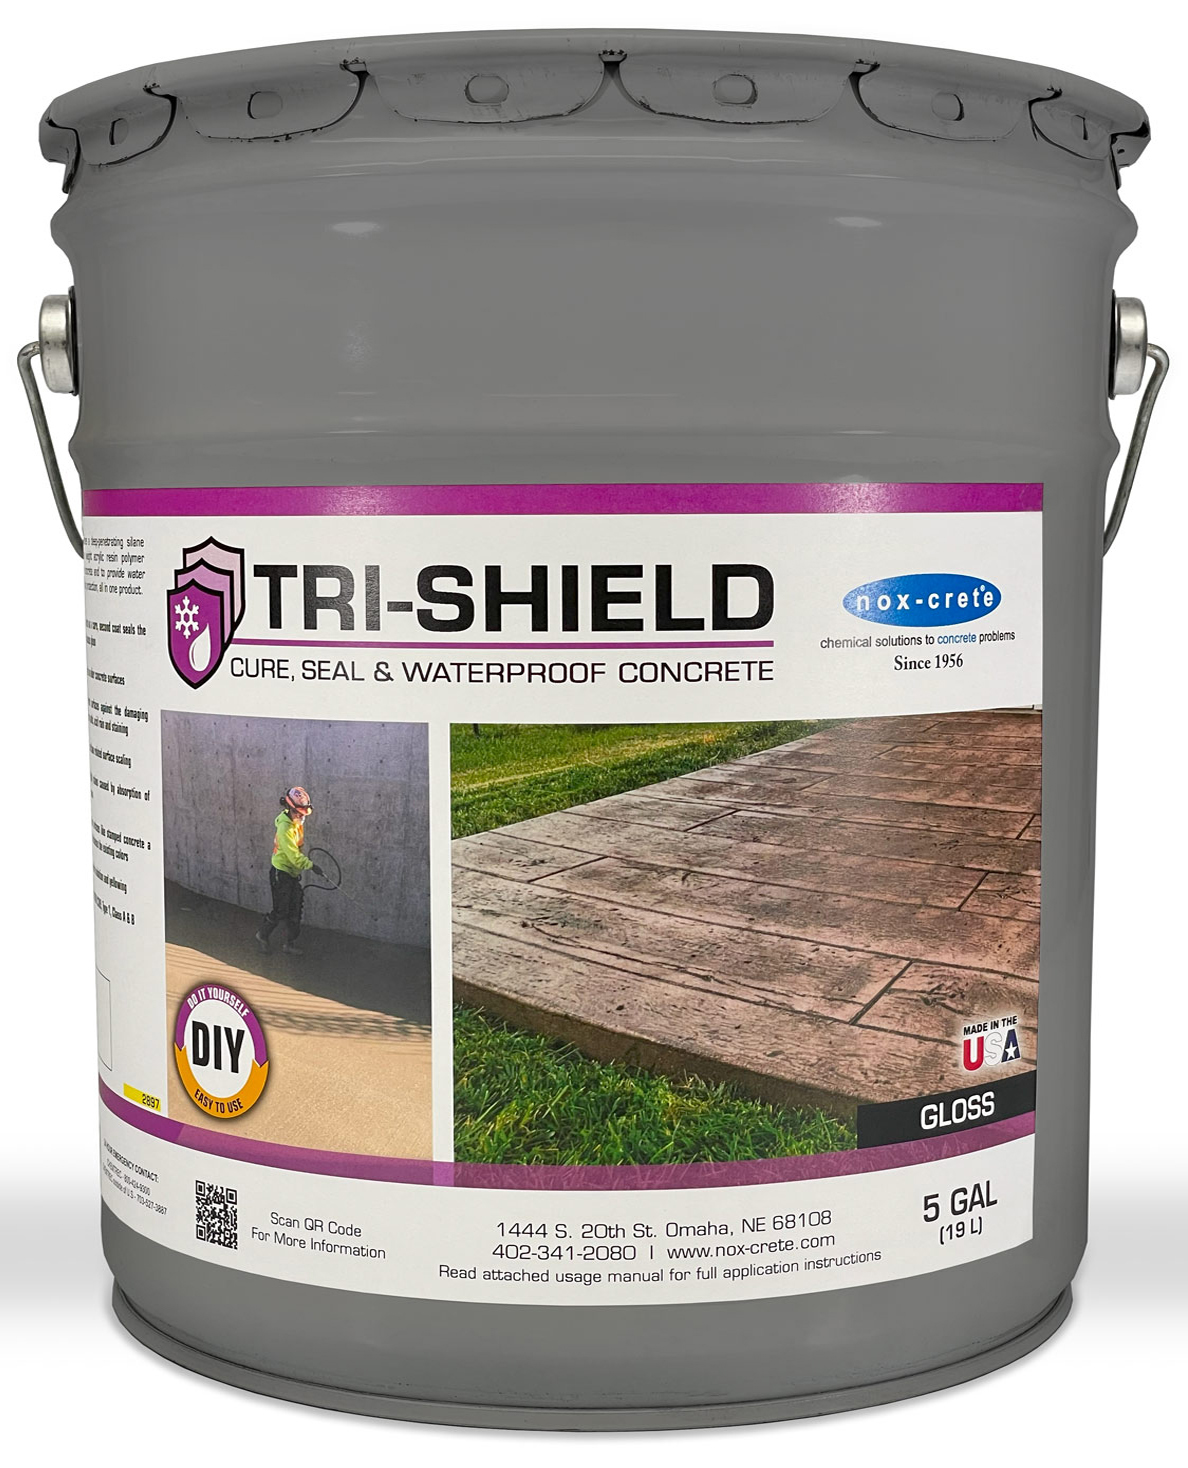 Polished Concrete Concentrate Sealer - Used on Smooth Concrete